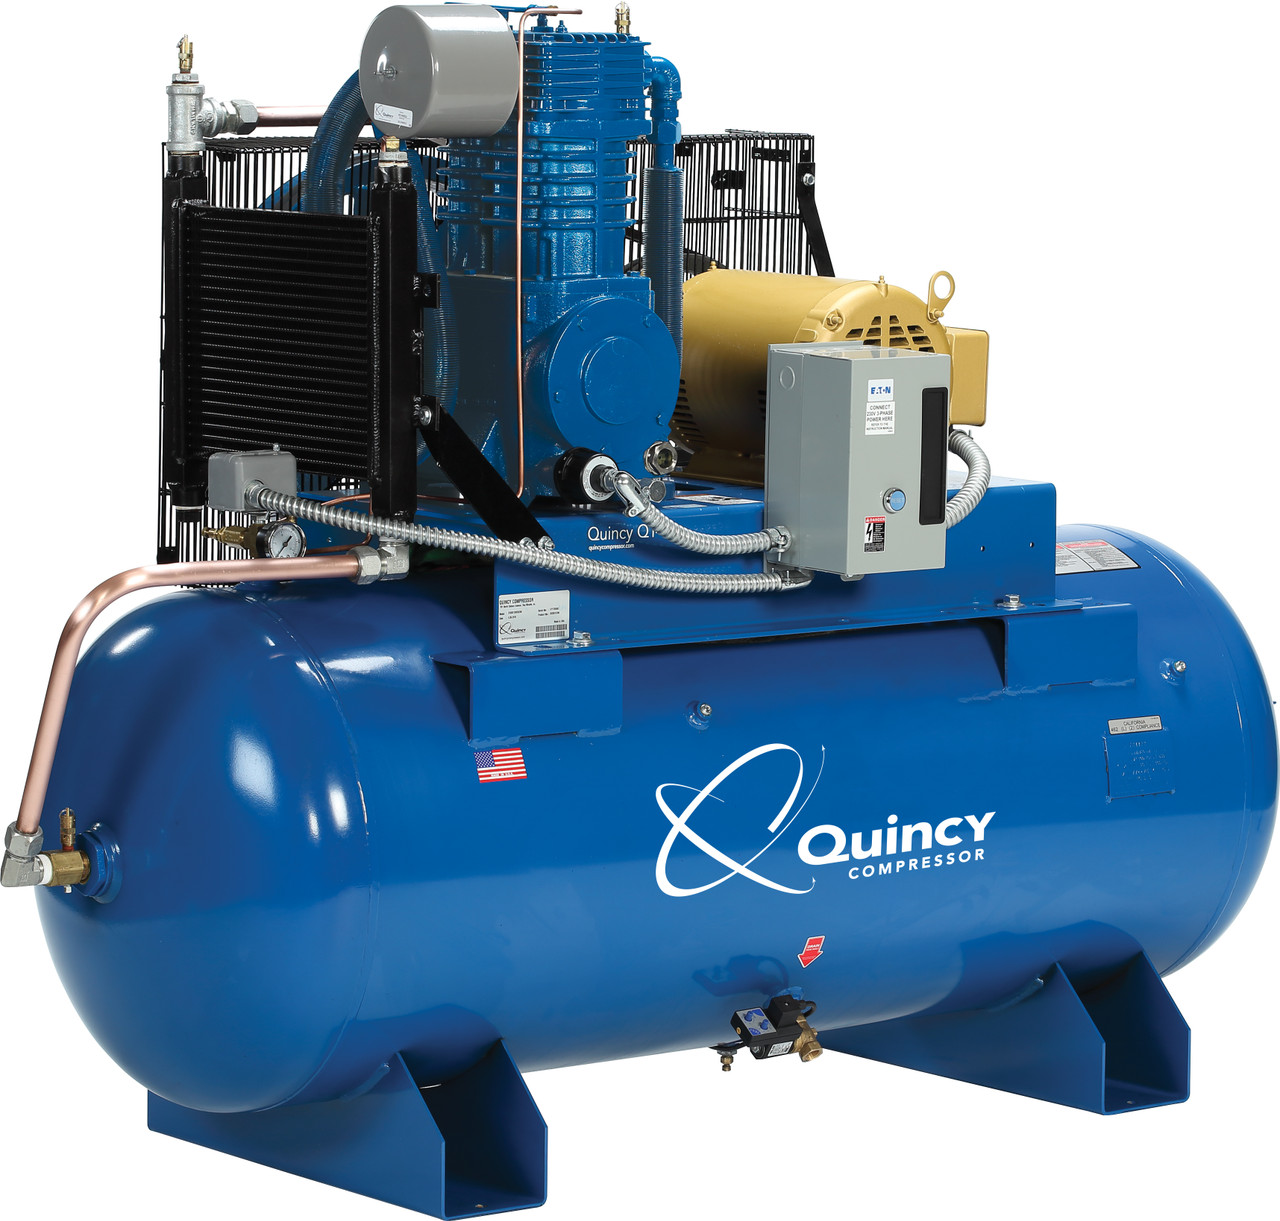 Quincy P2103DS12HCB23M 10 HP MAX, 230 Volt Three Phase, Two Stage, 120 Gallon Horizontal Air Compressor